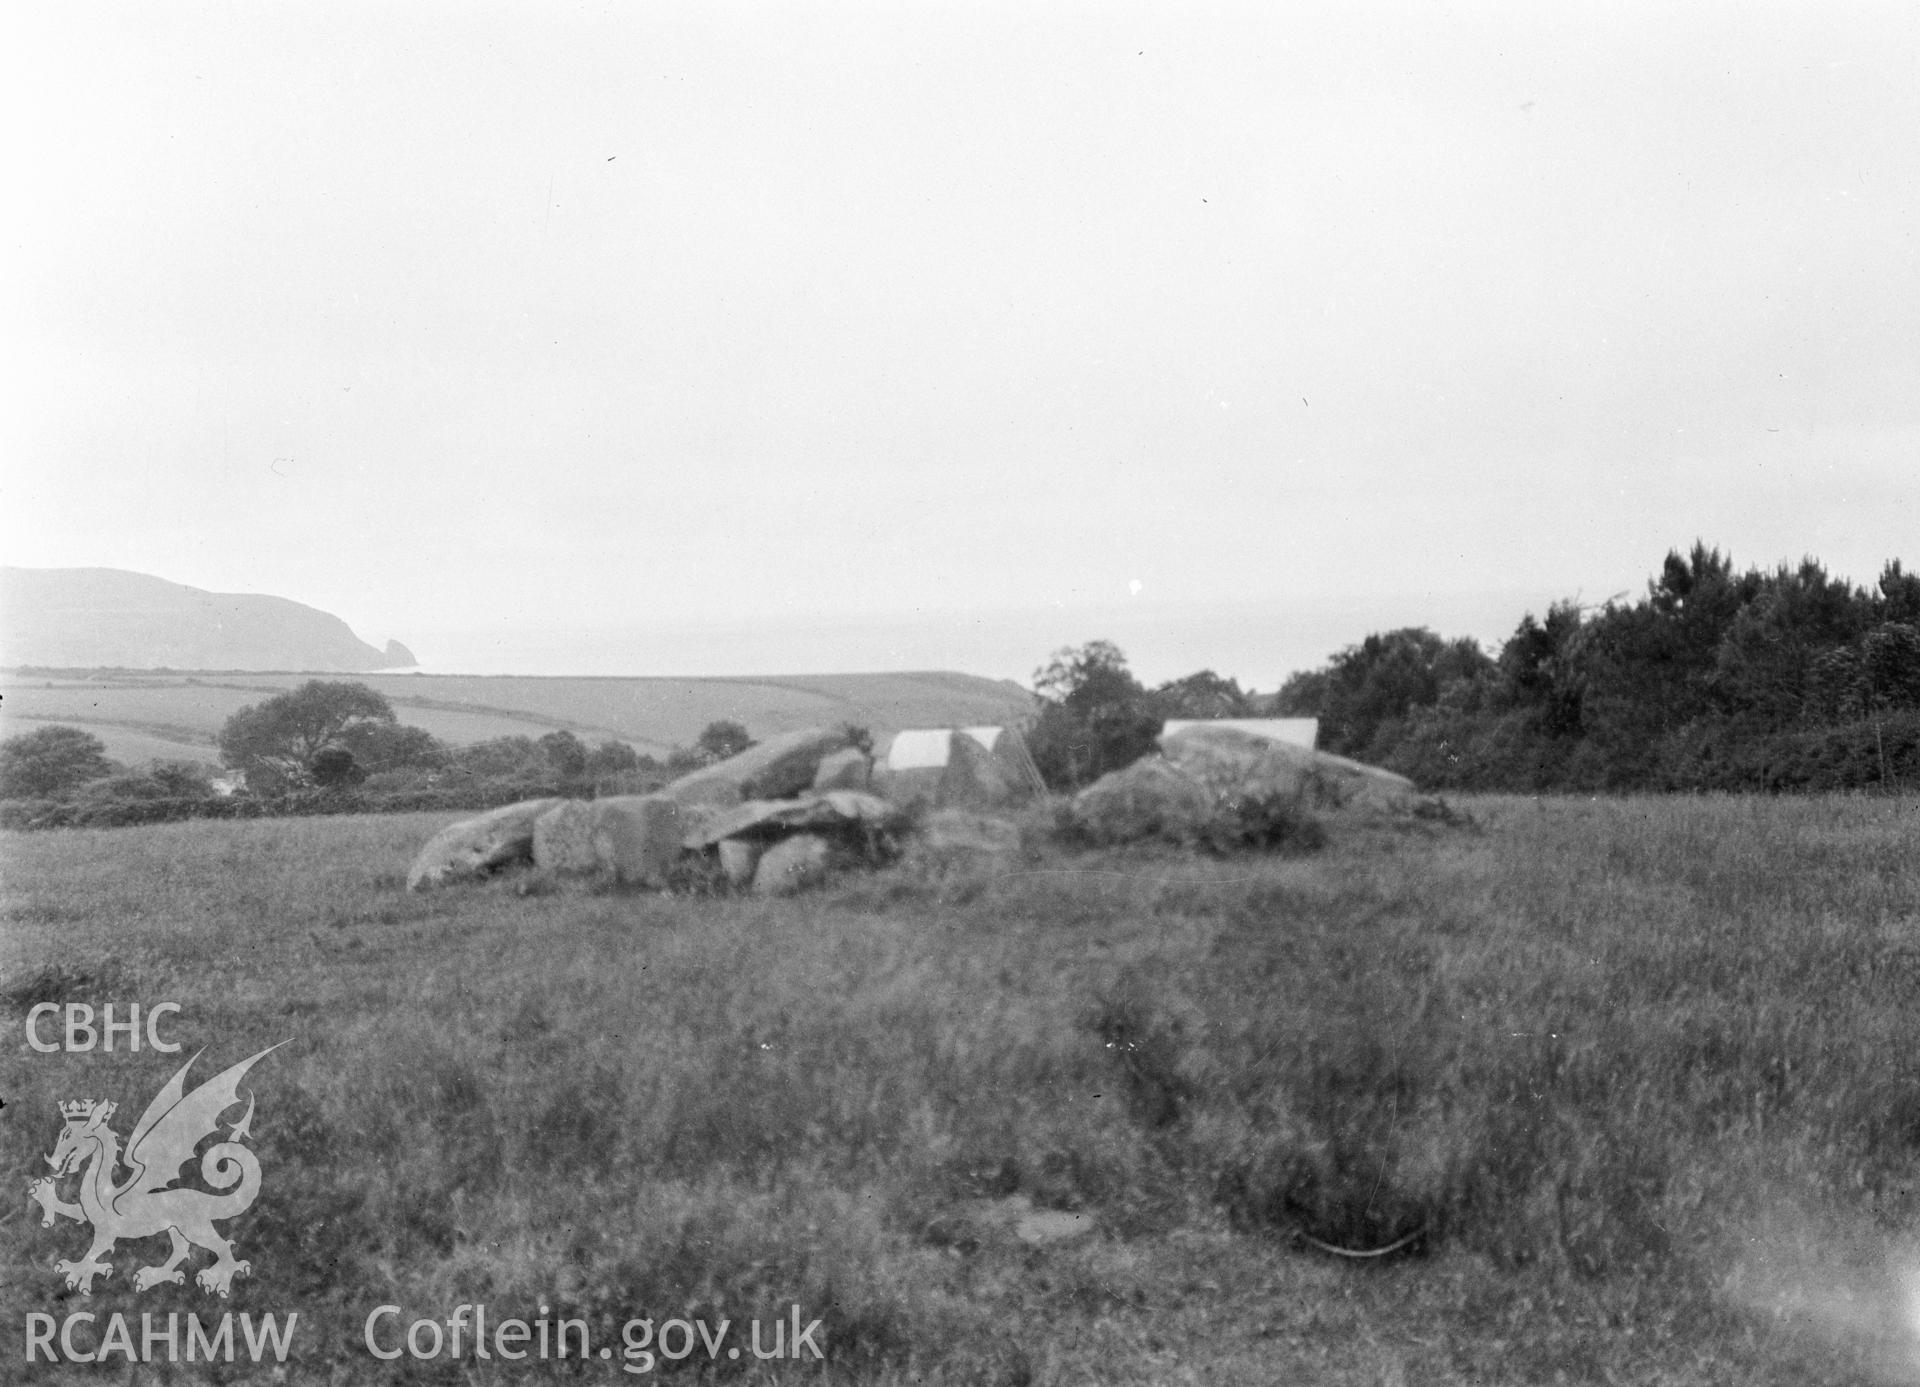 Digital copy of a nitrate negative showing view of Cerrig y Gof Burial Chamber.